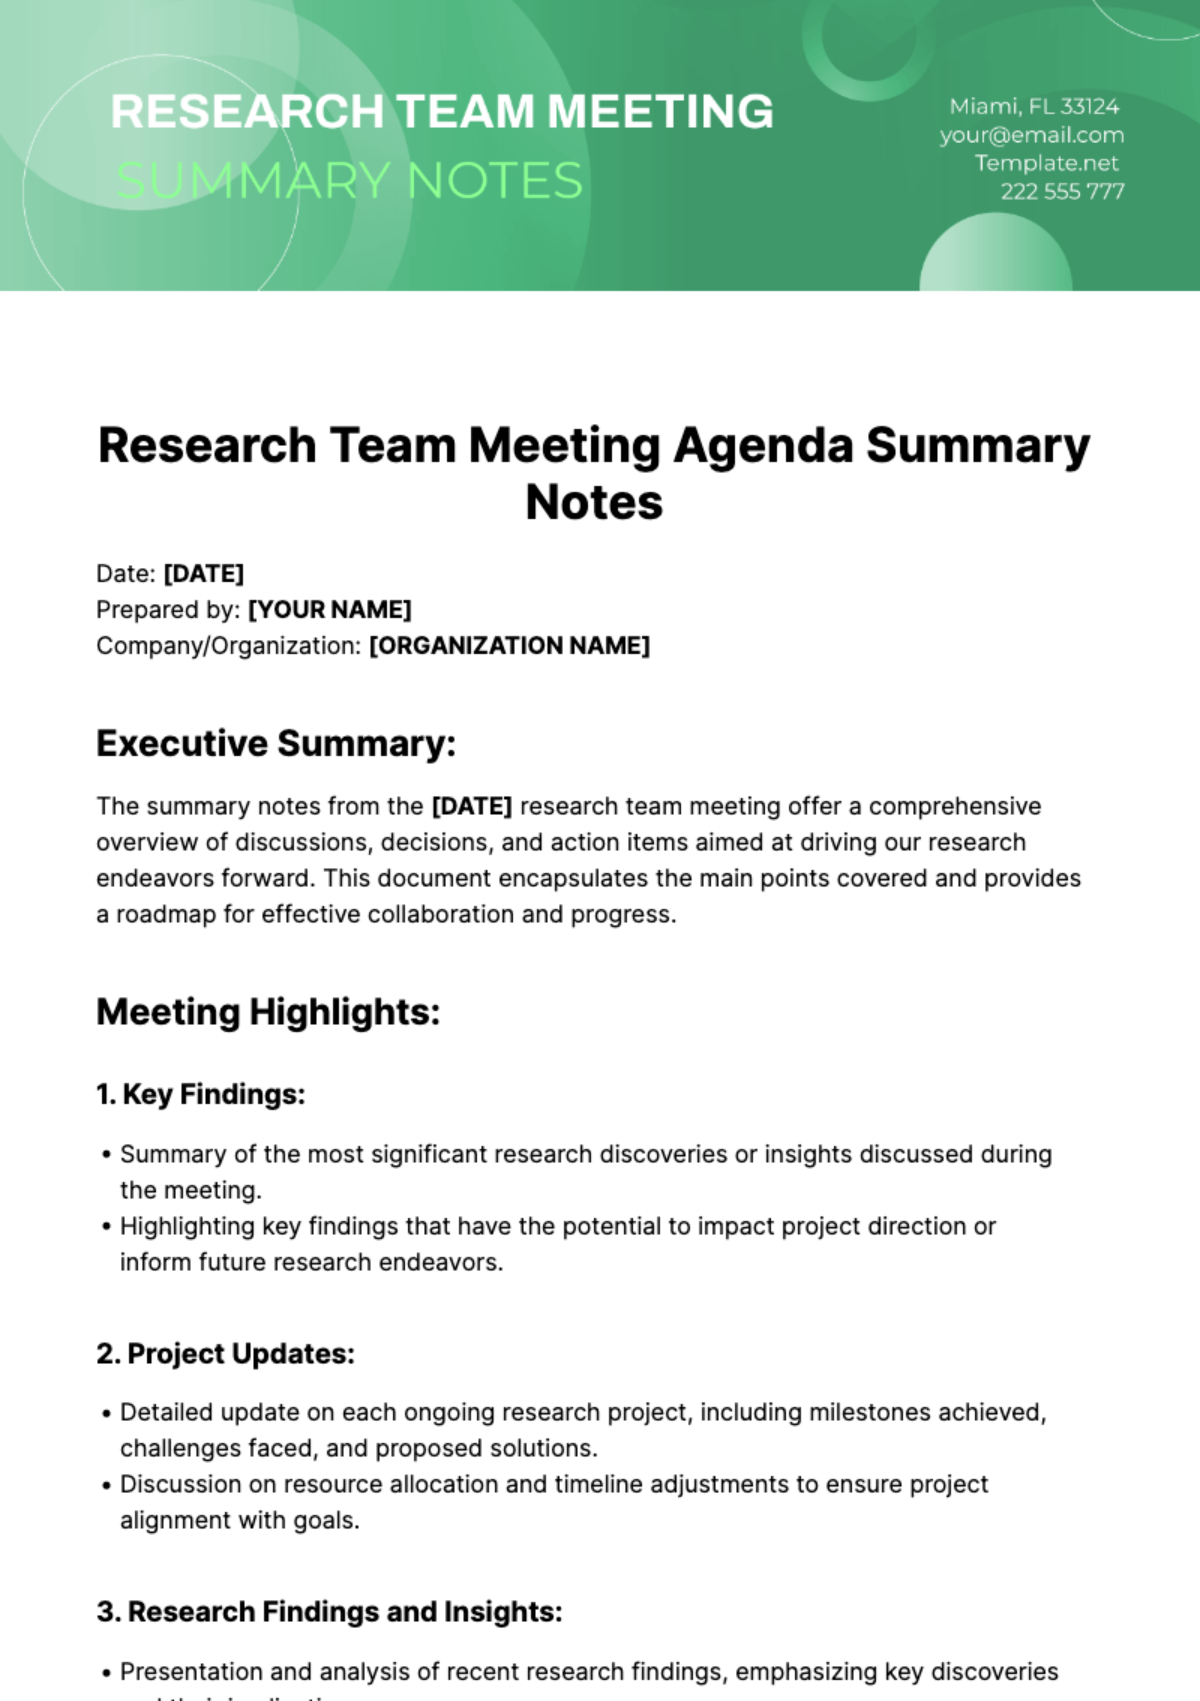 Free Research Team Meeting Agenda Summary Notes Template